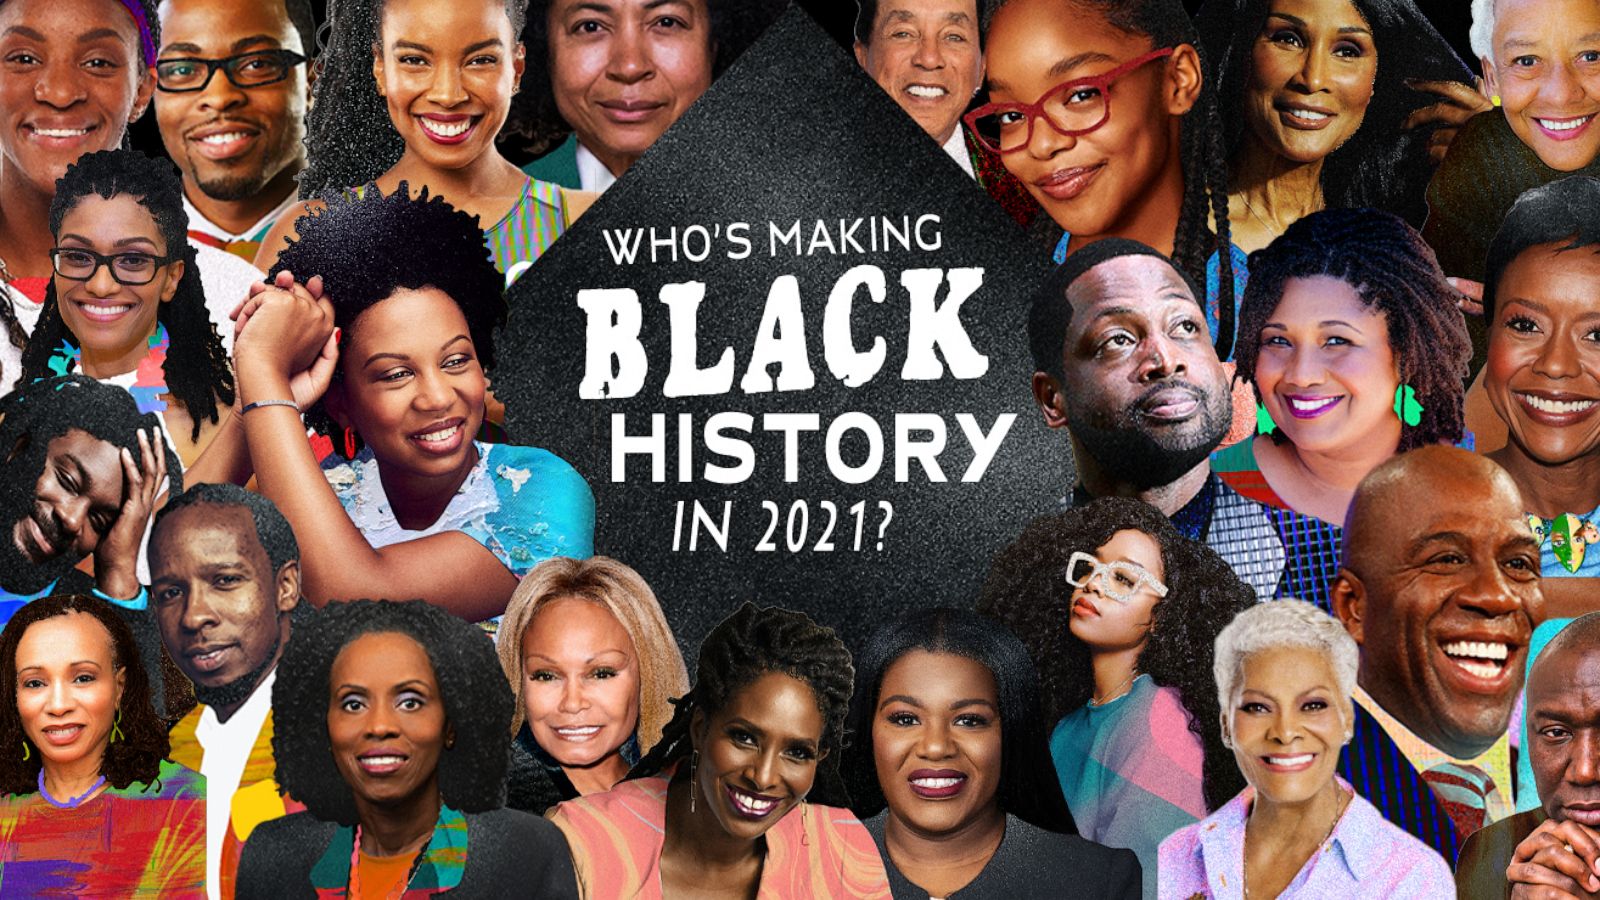 The GMA Inspiration List: Who's making Black history in 2021? - ABC News